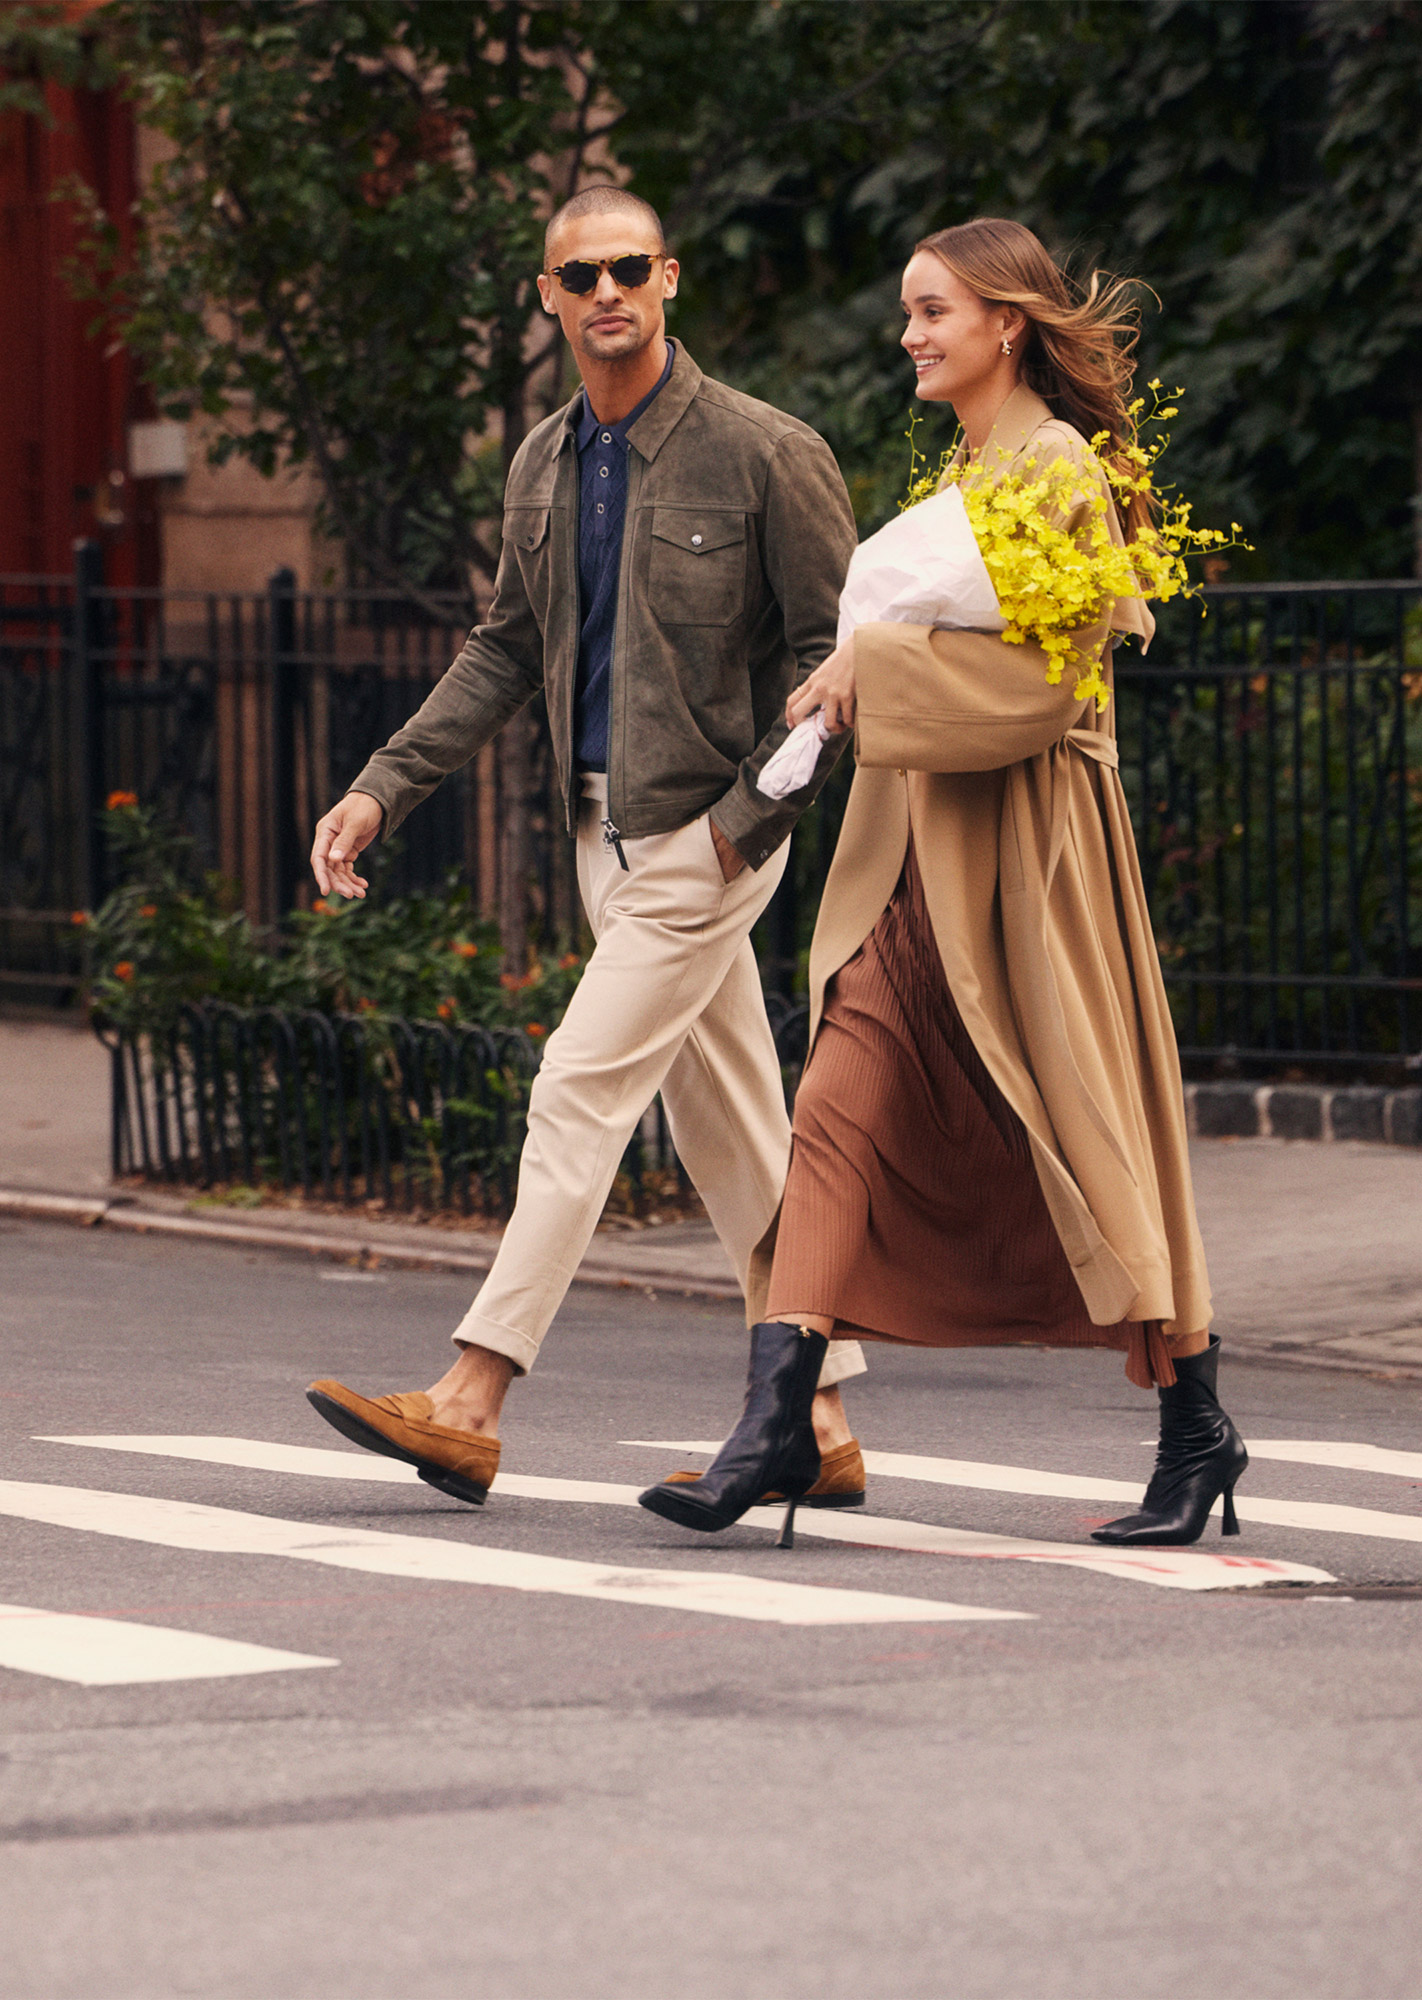 Man wearing glasses and woman holding yellow flowers walking down the street